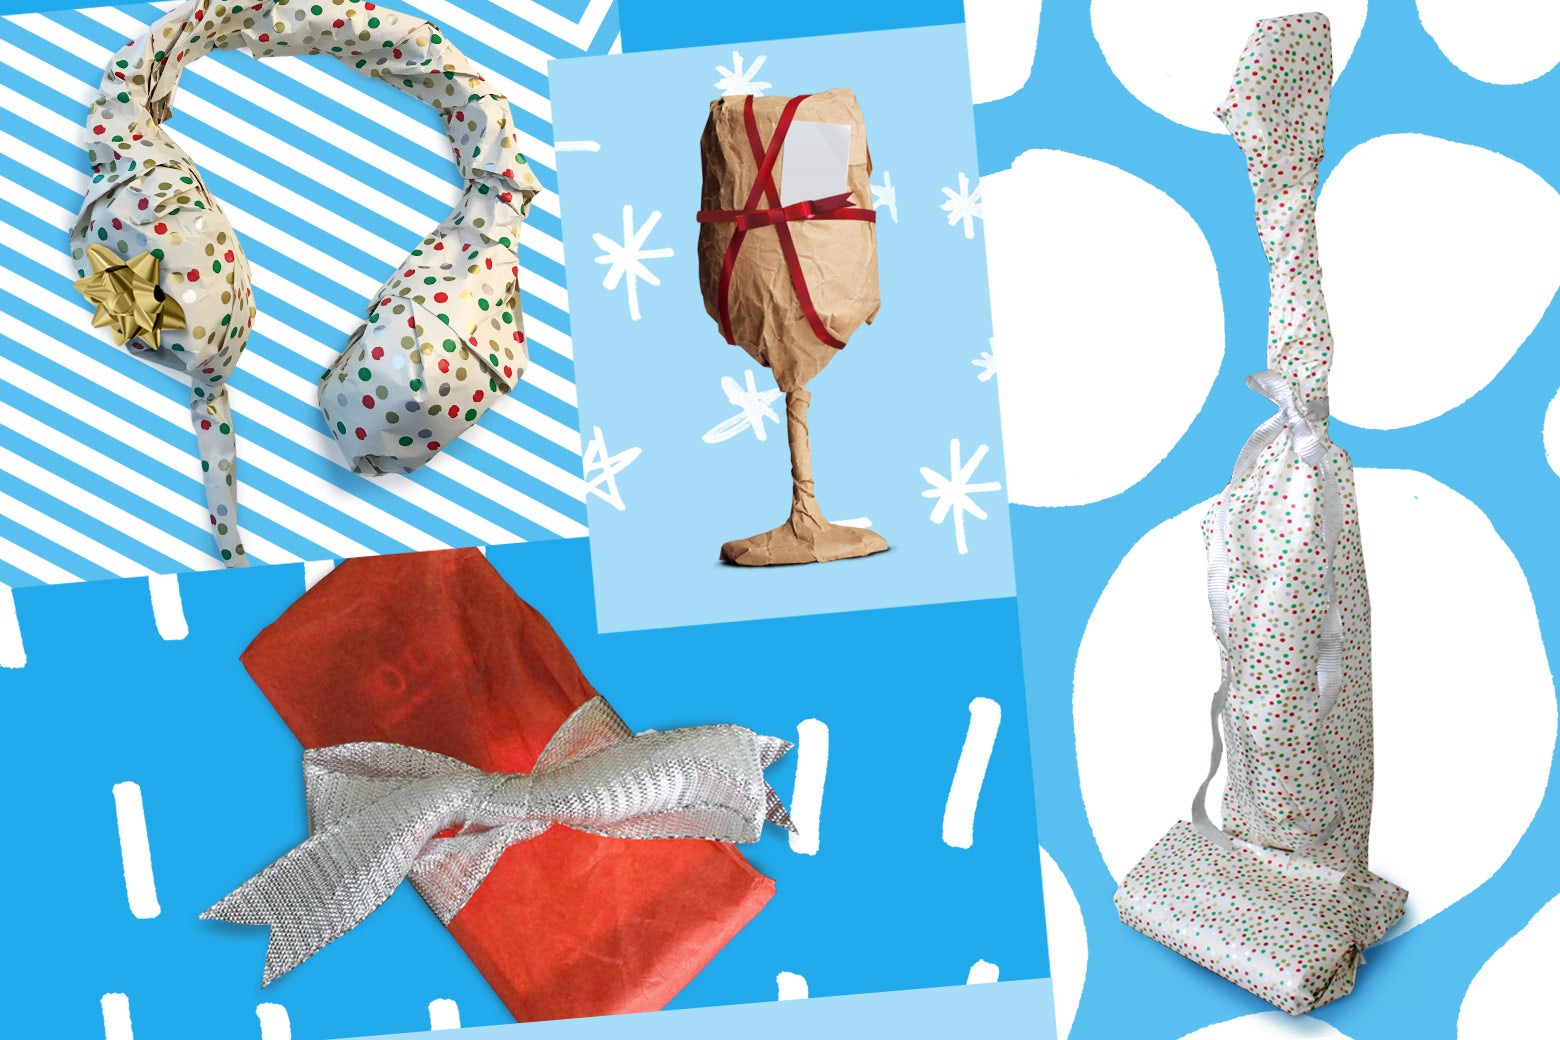 Wrapped gifts: headphones, wine glass, vacuum cleaner